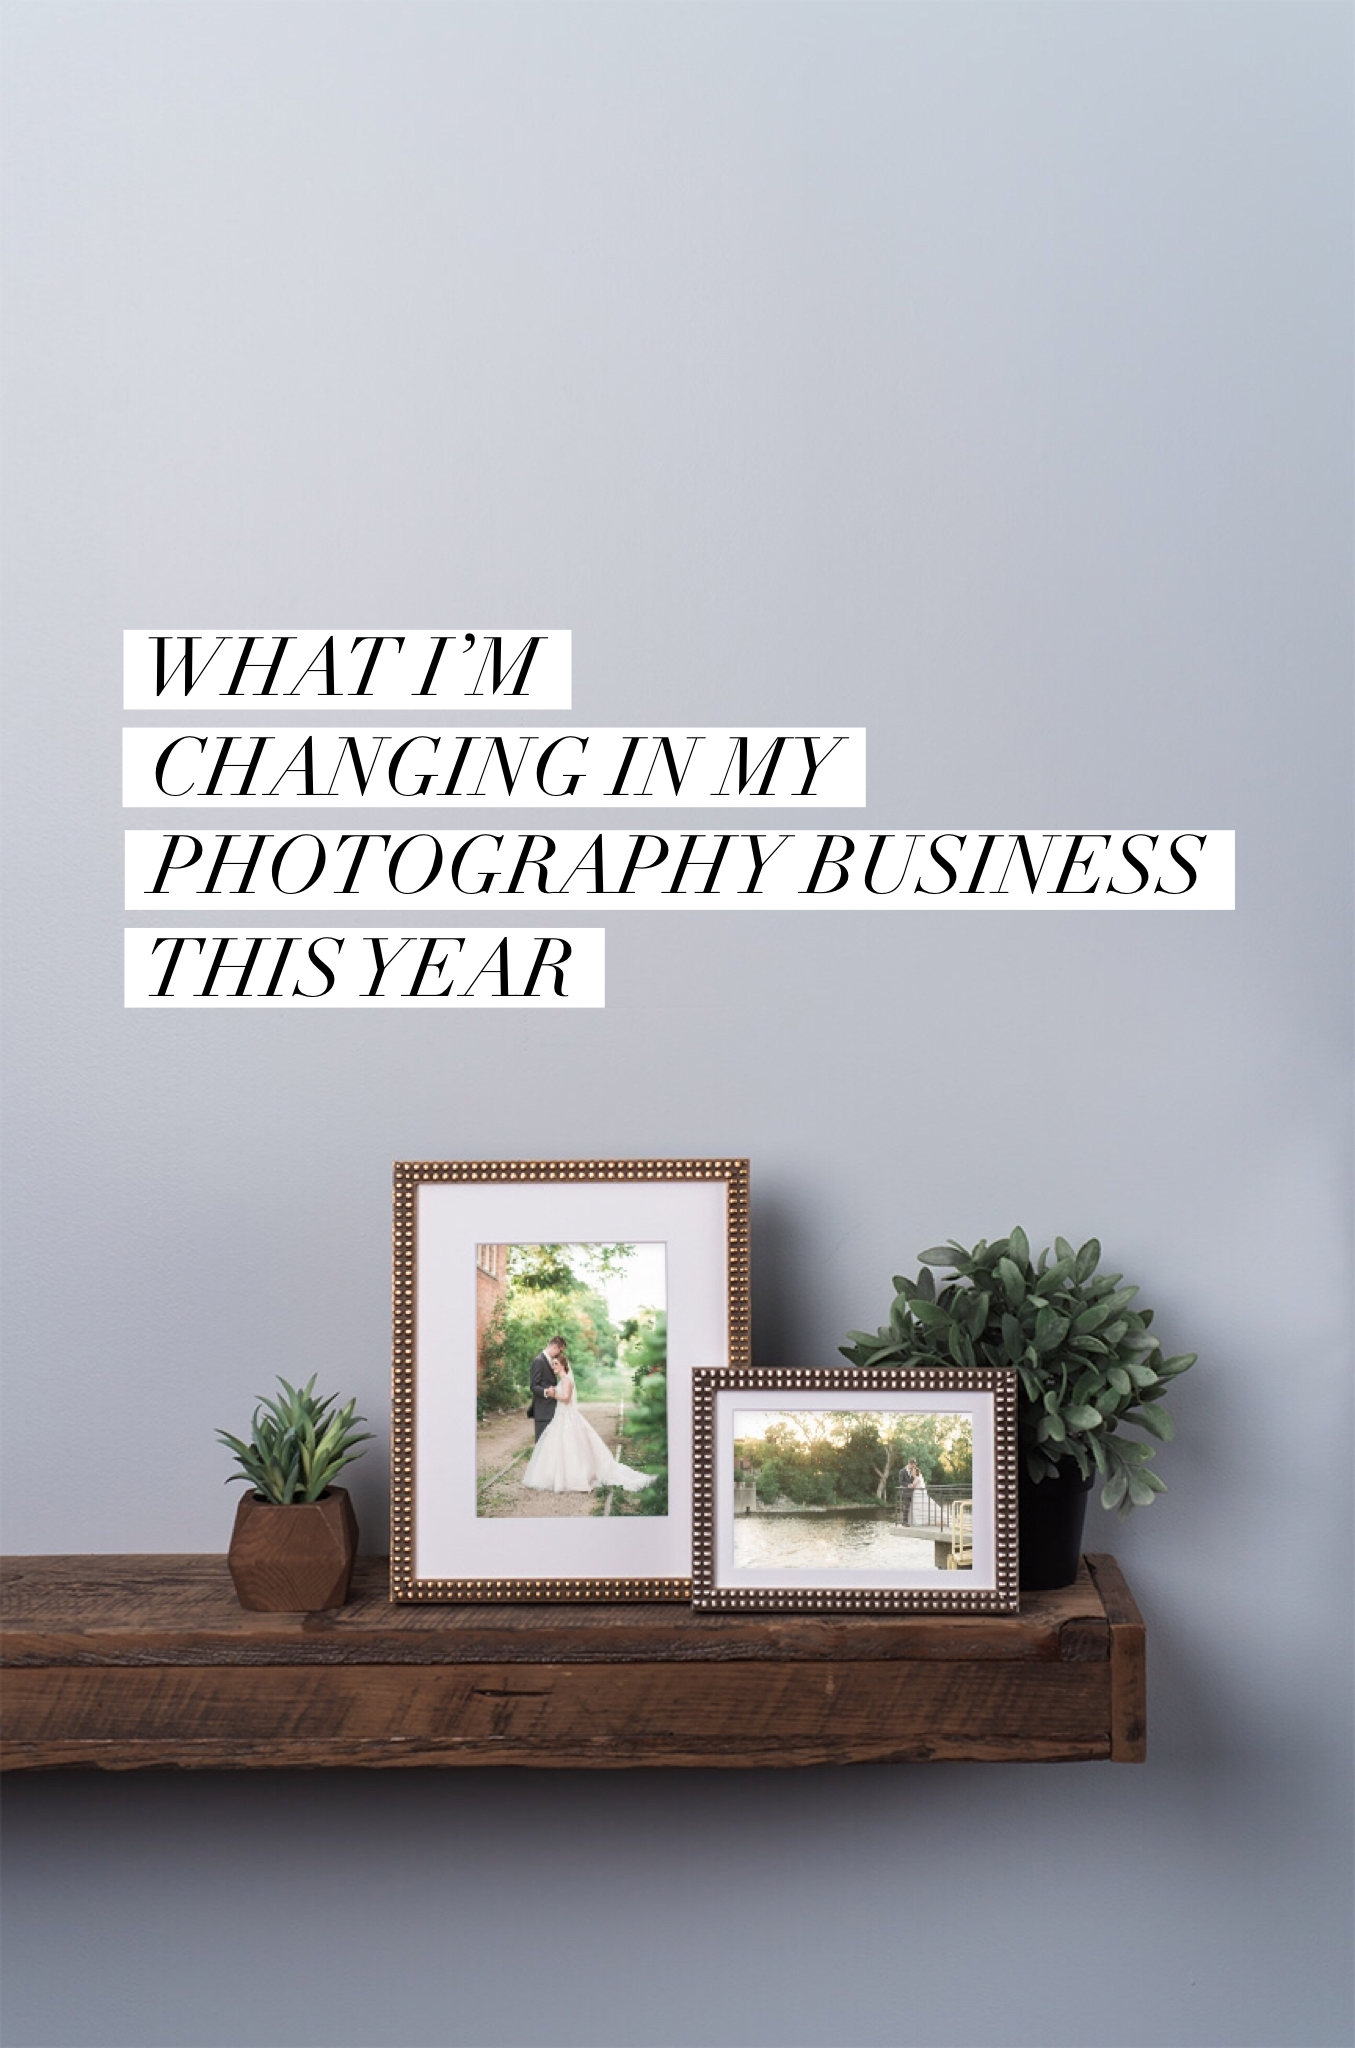 What I'm changing in my photography business this year